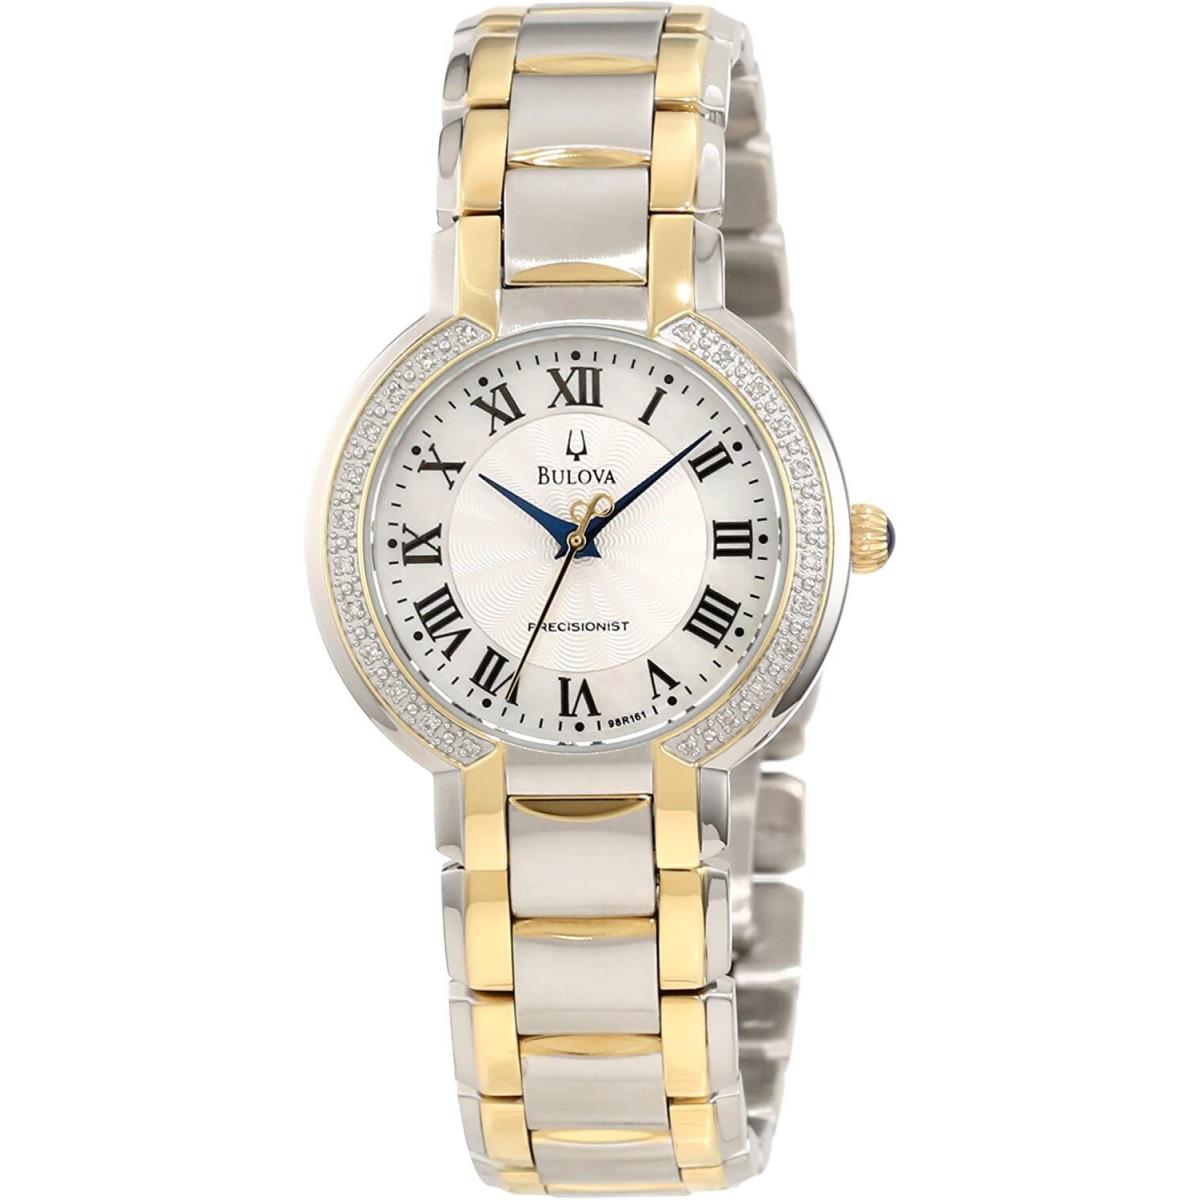 Bulova Precisionist Silver Dial Two-tone SS Women`s Watch 98R161 - Dial: Silver, Band: Gold, Bezel: Silver